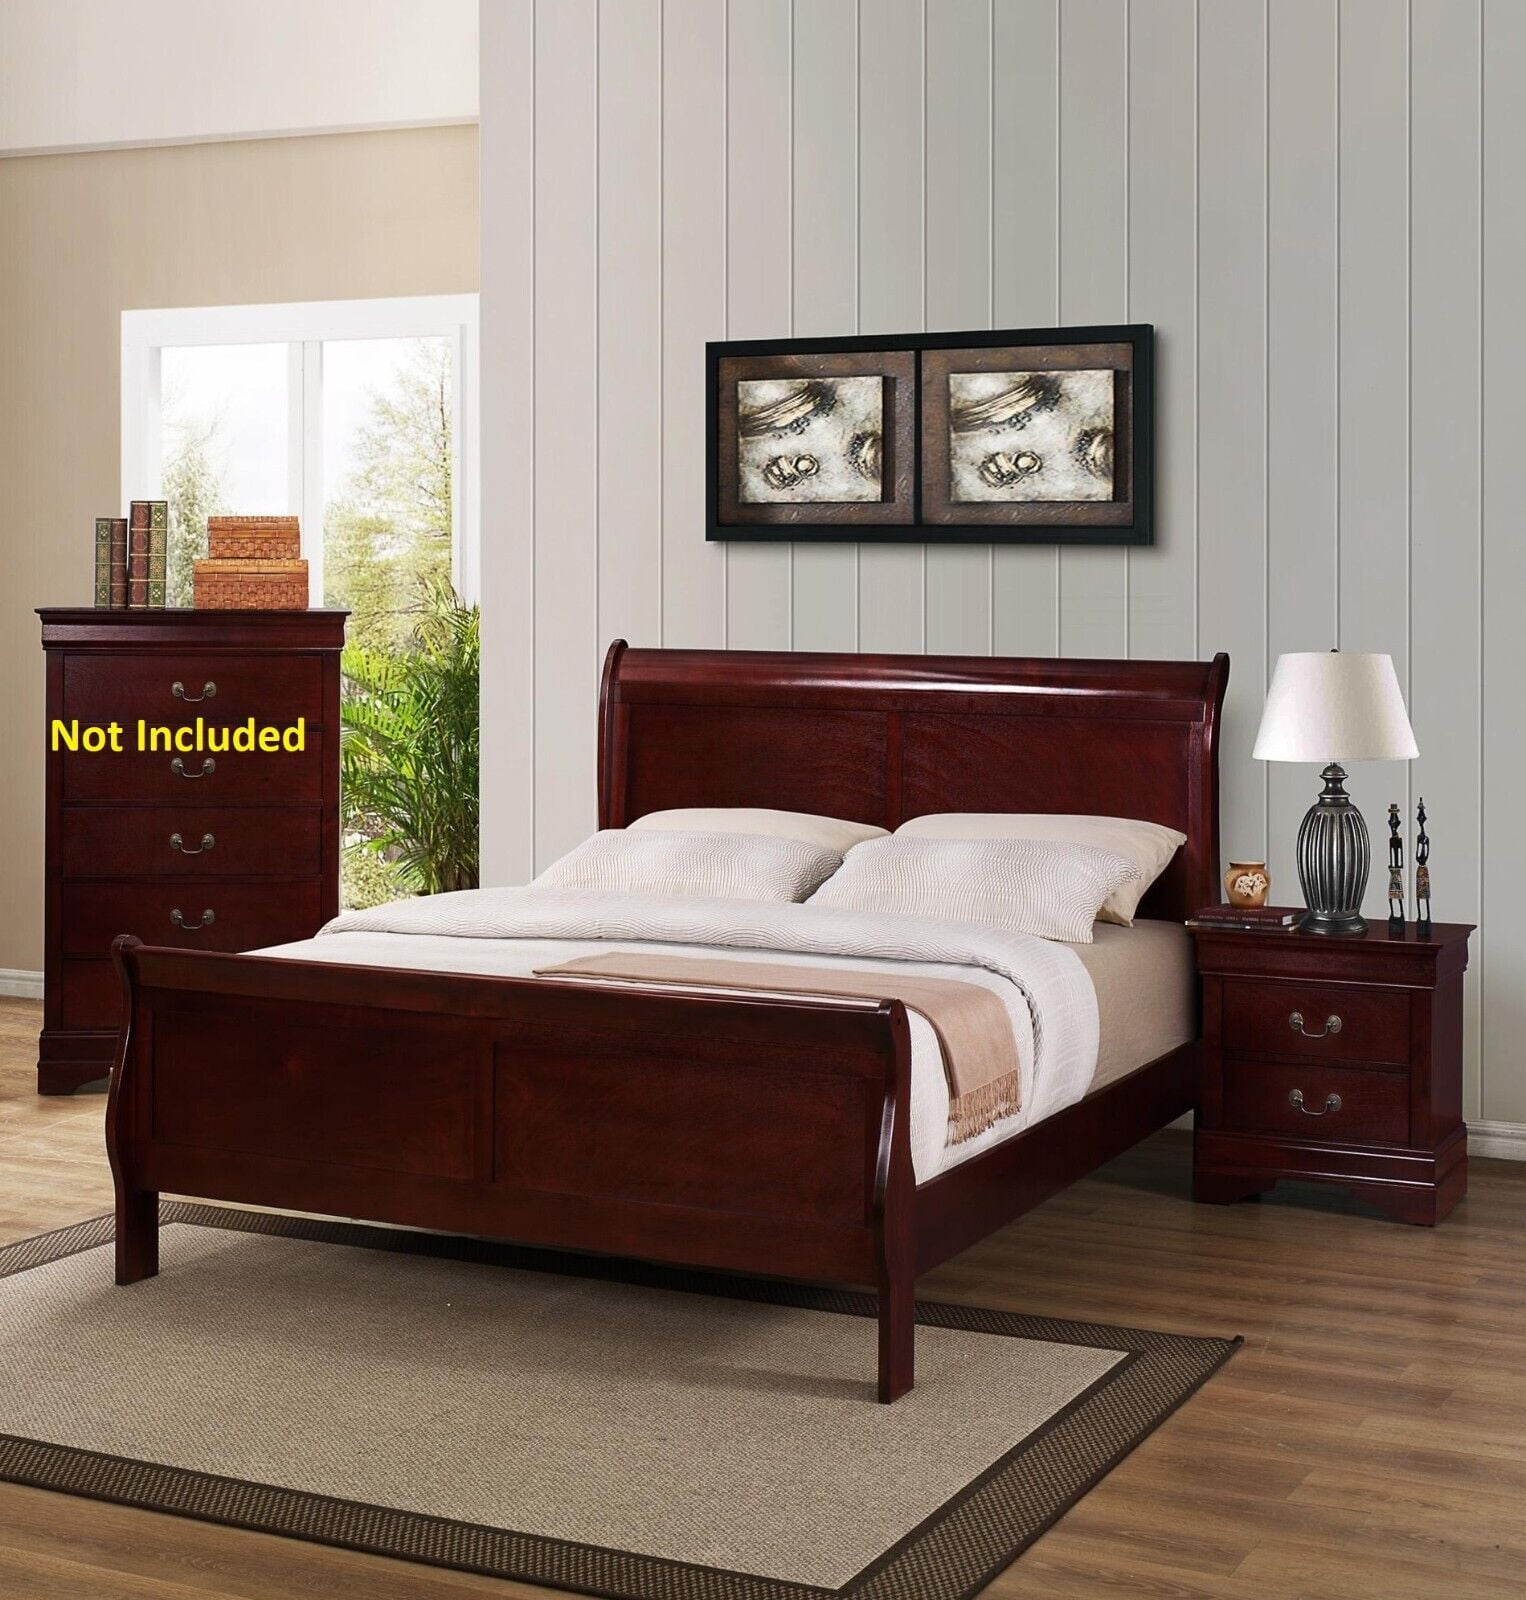 Traditional Style Classic 3pc Louis Philip Bedroom Set Full Size Panel Bed and 2x Nightstands Cherry Brown Finish Wooden Furniture -Brand New